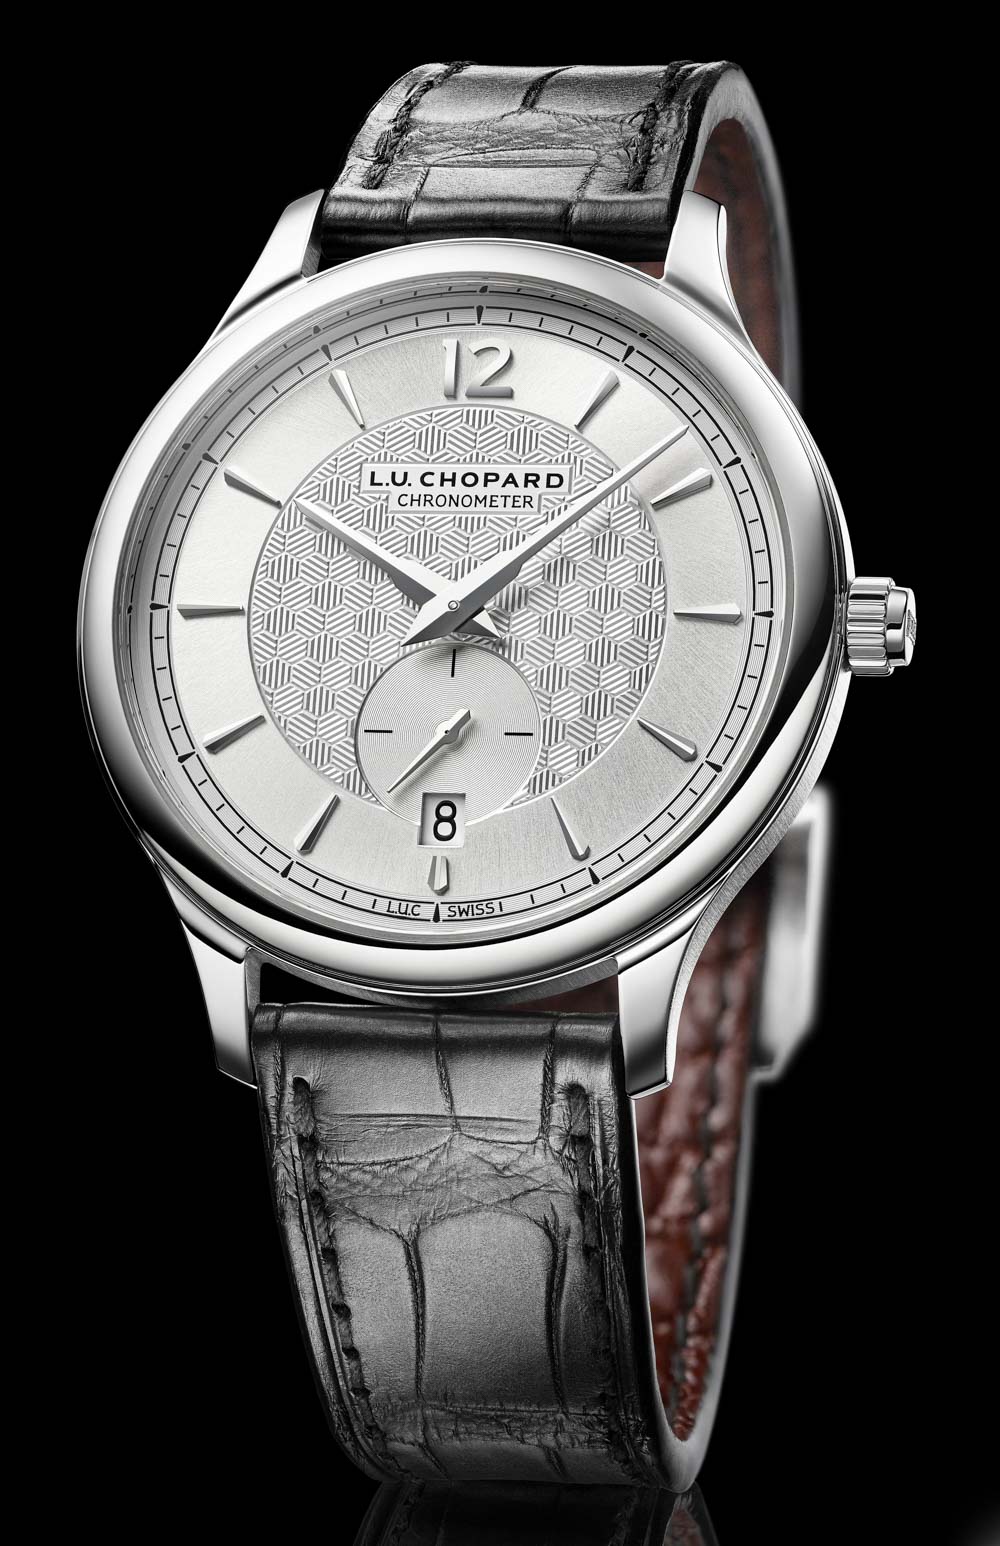 The Chopard L.U.C. XPS 1860 Officer (1 of 50) challenges the very